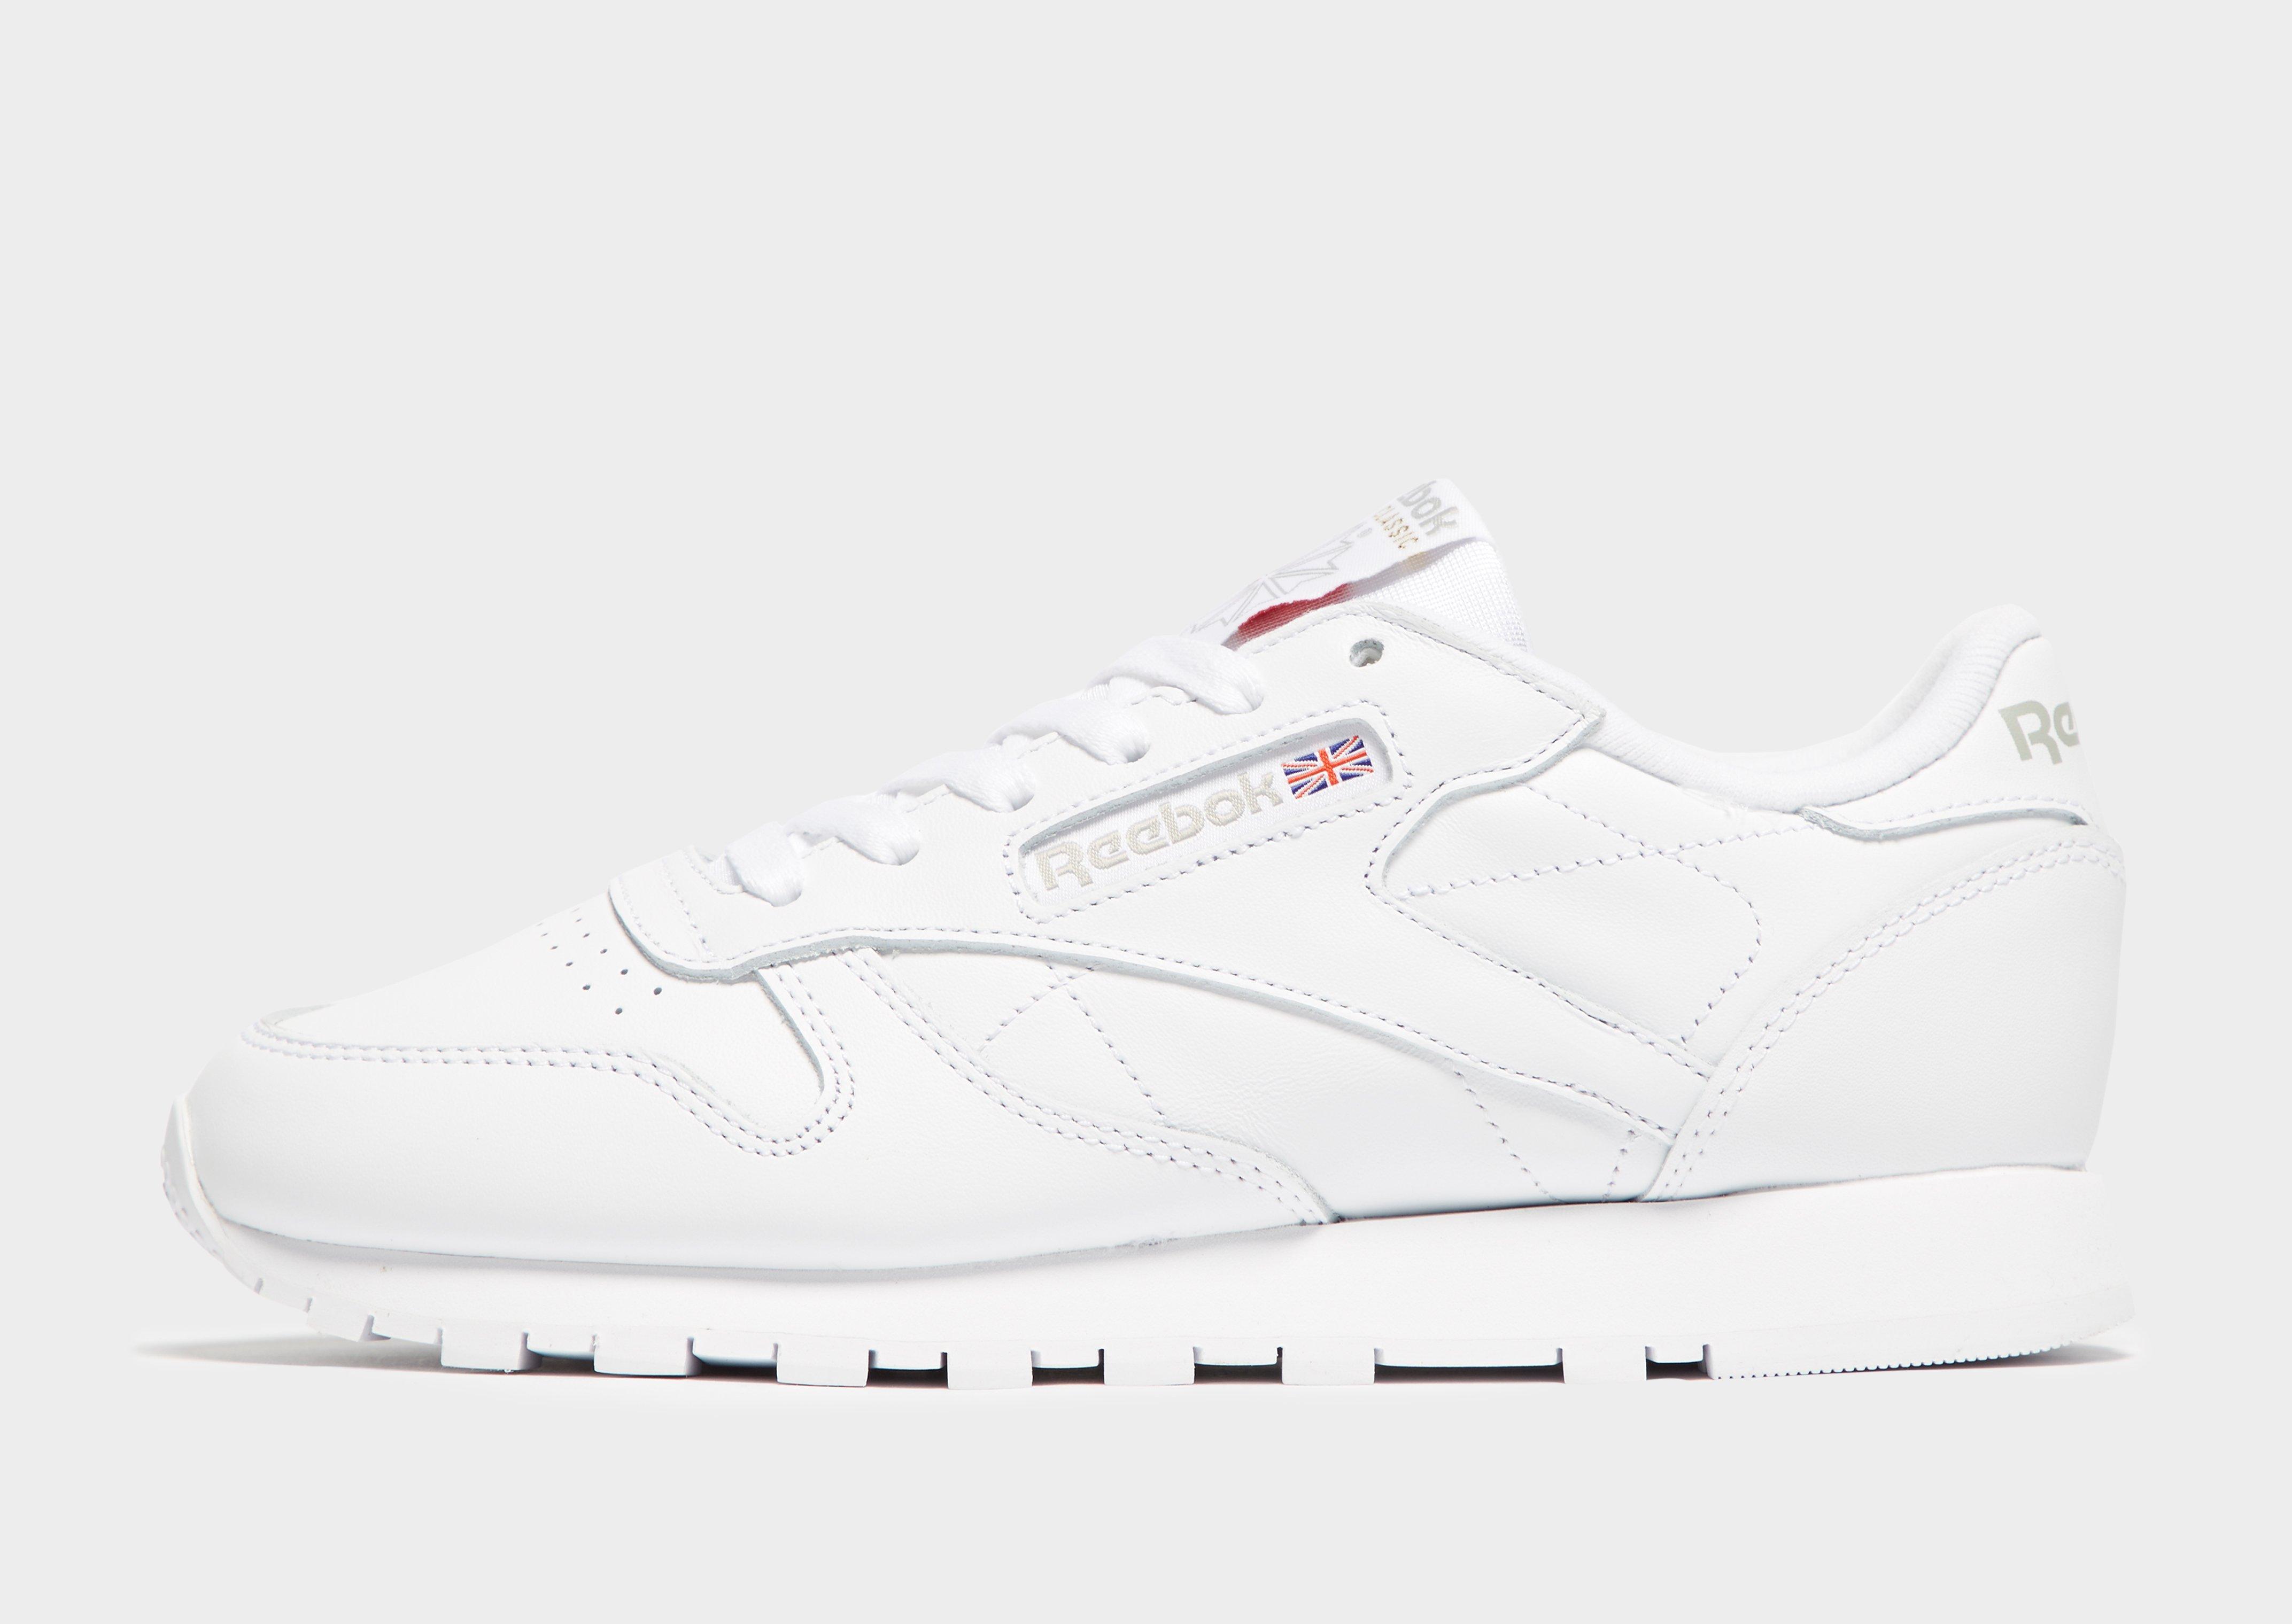 reebok classic leder weiss,Save up to 16%,www.ilcascinone.com